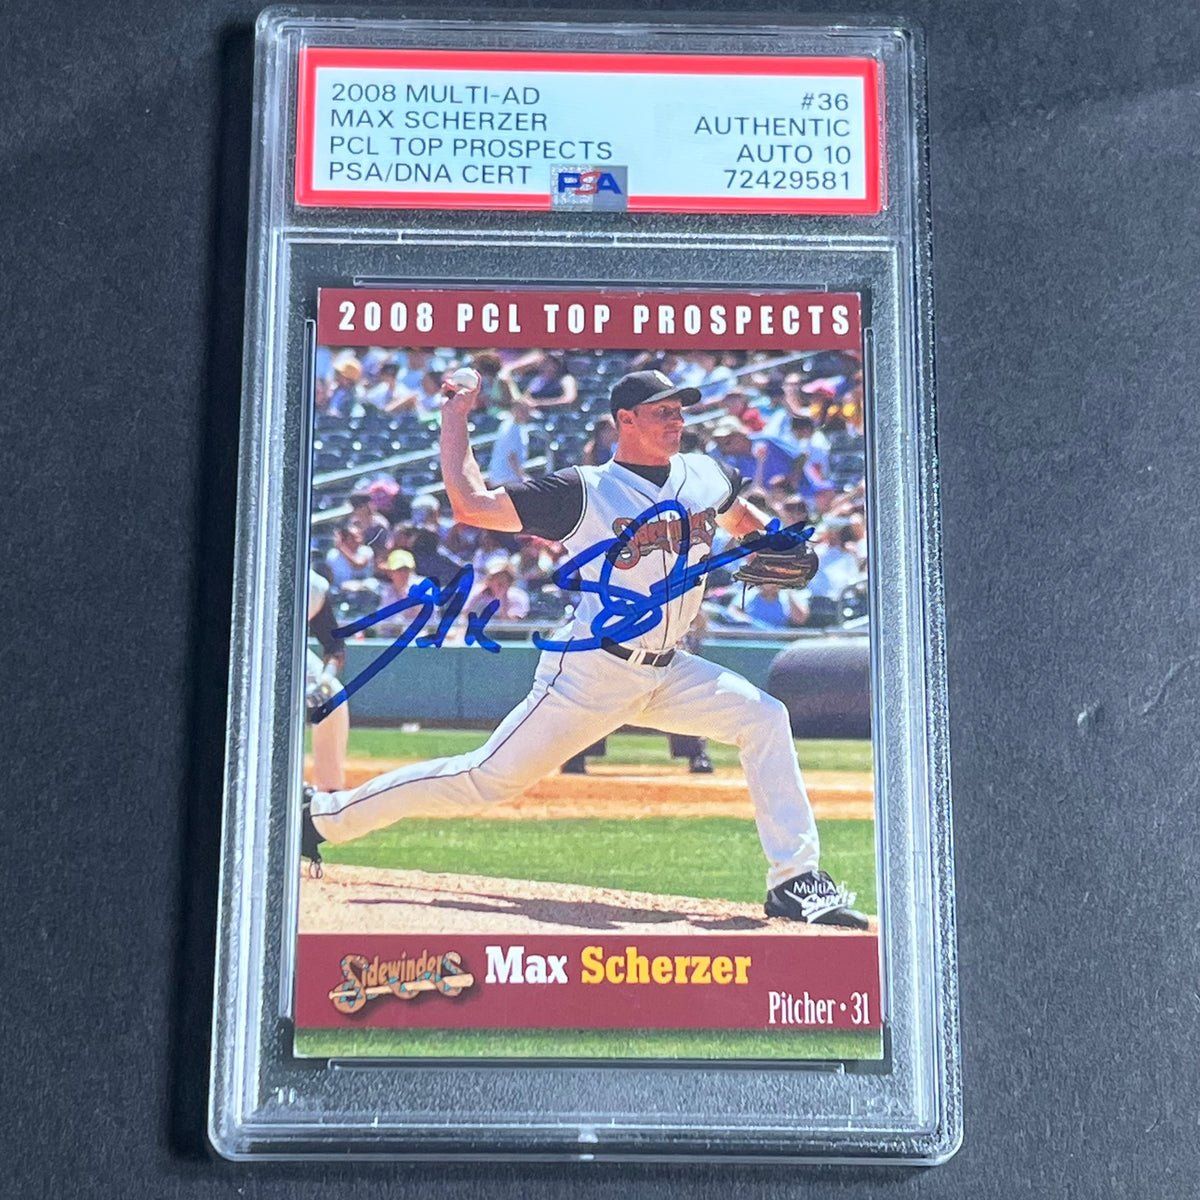 2008 Multi-ad PCL Top Prospects #36 Max Scherzer Signed Card PSA